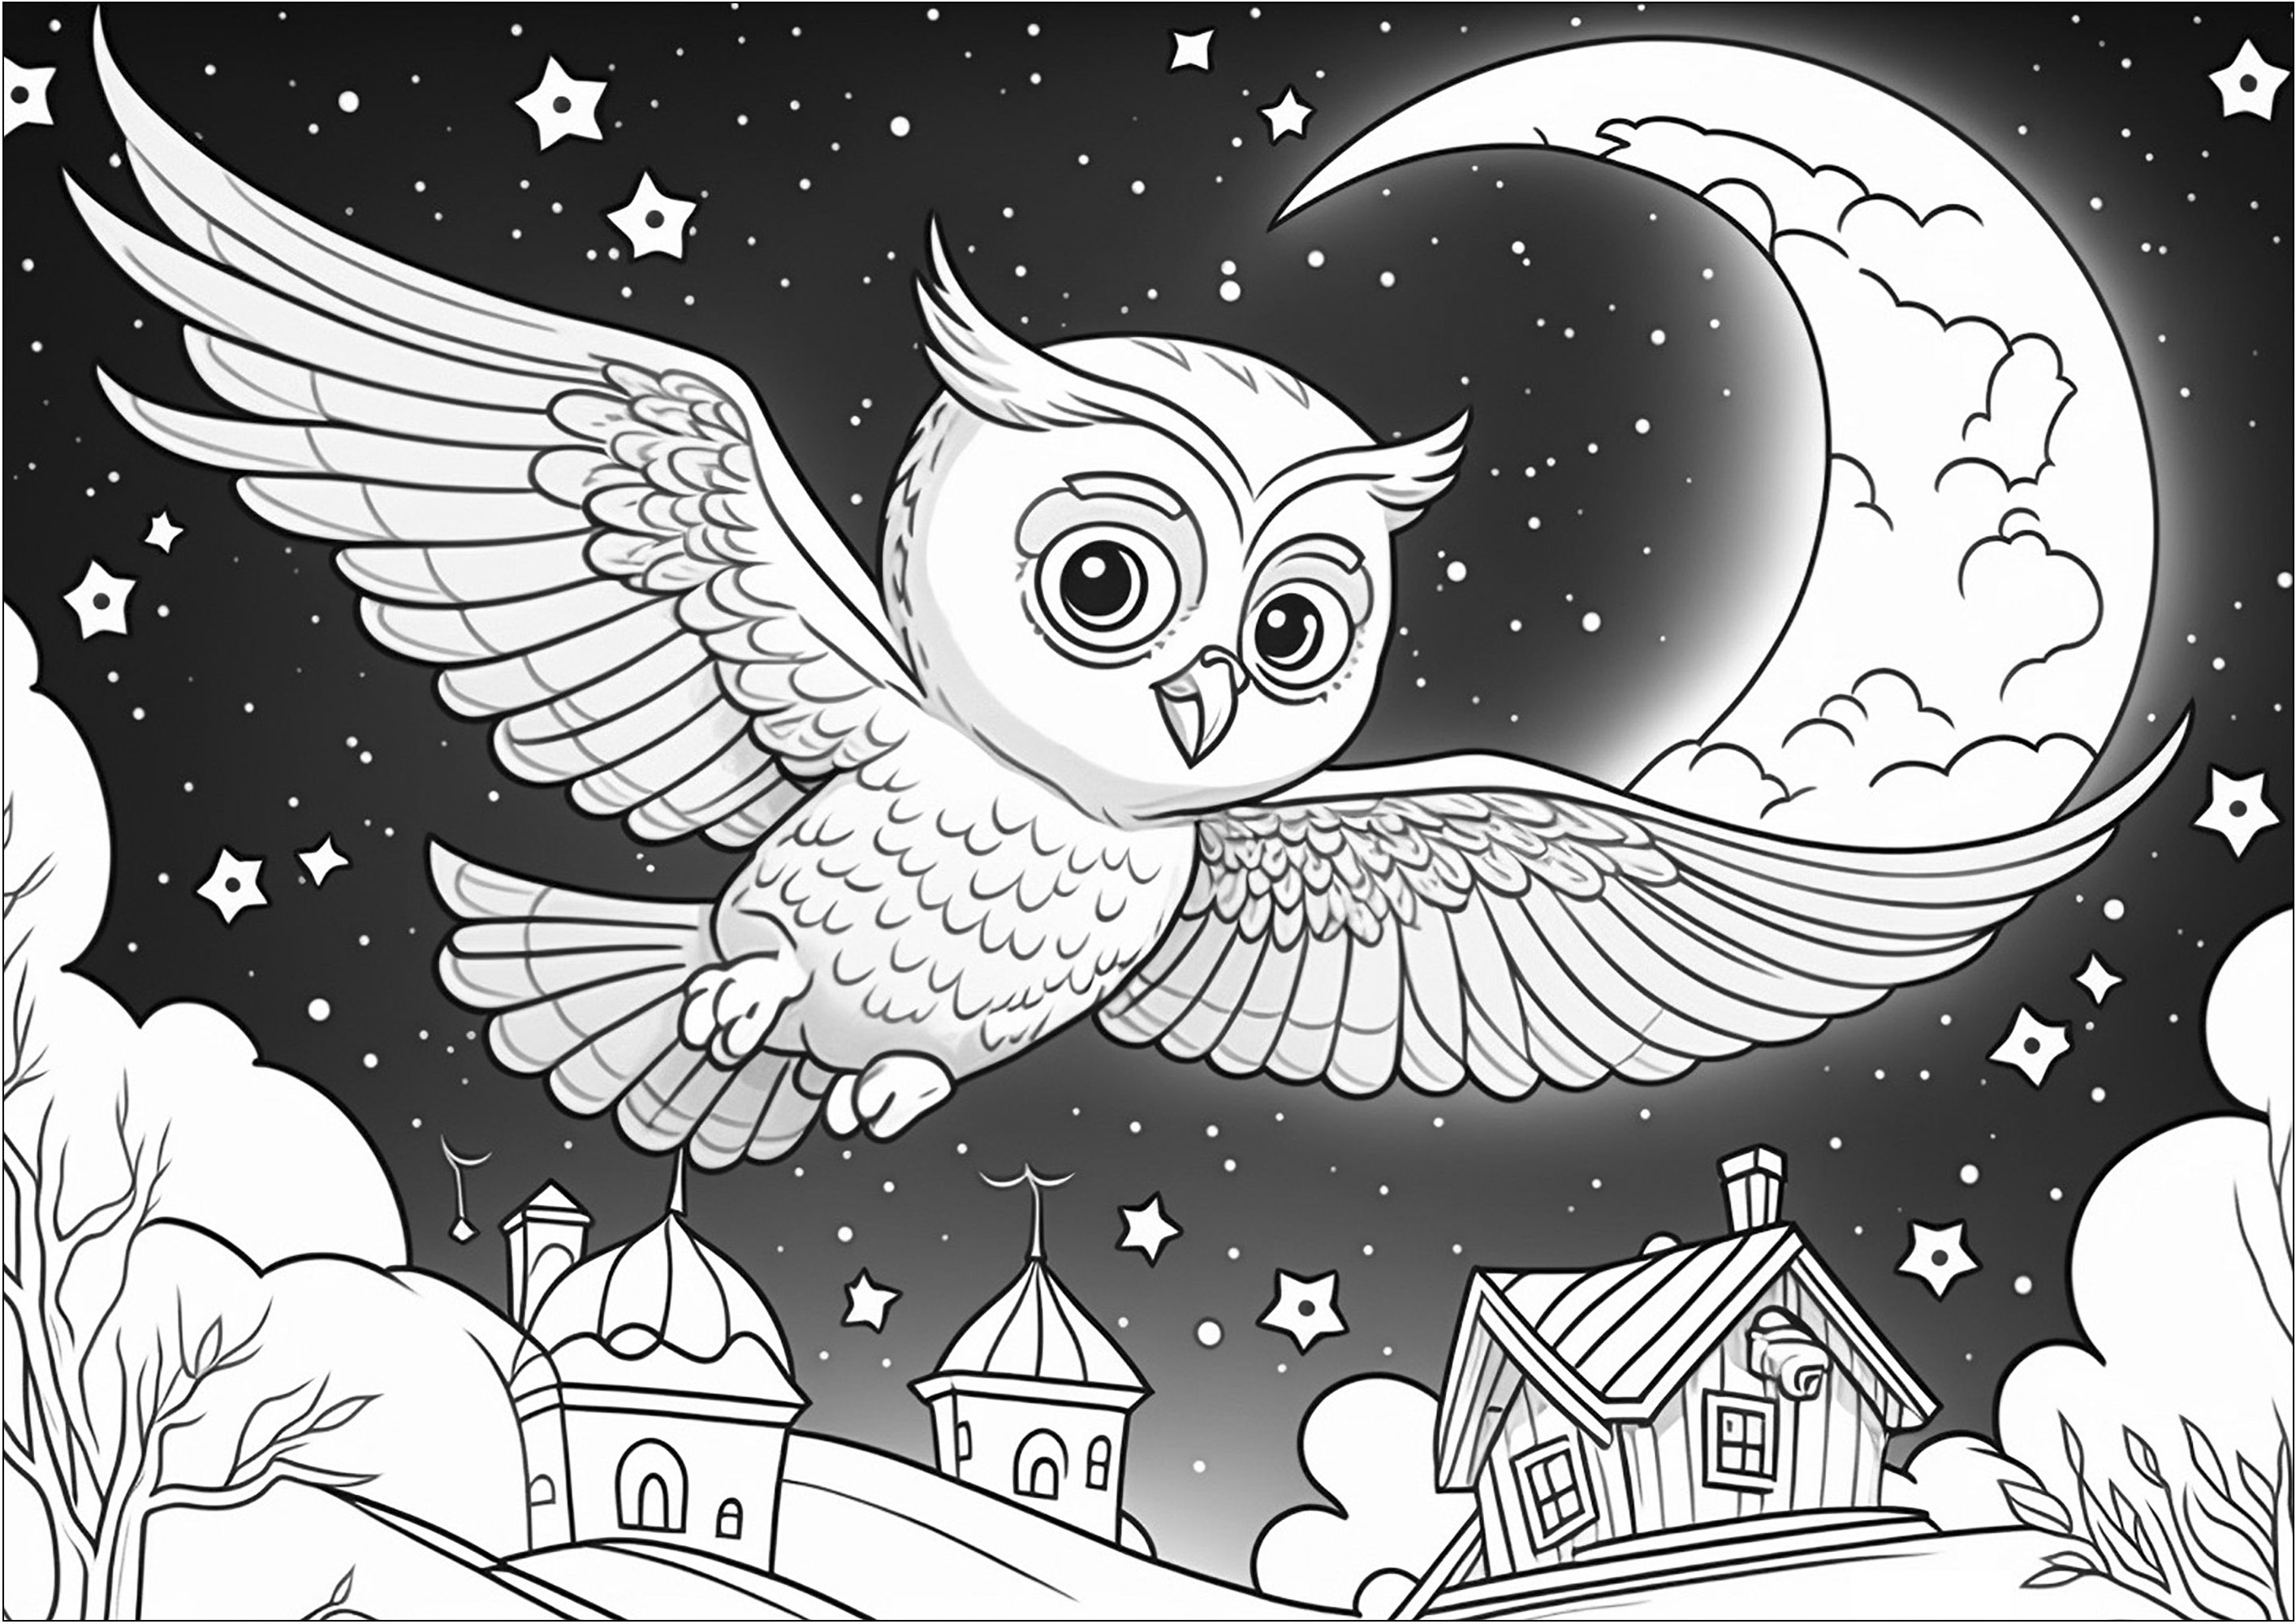 A beautiful coloring with an owl flying over a collage. Lots of stars to color, and fairly simple details for this owl and this beautiful village.